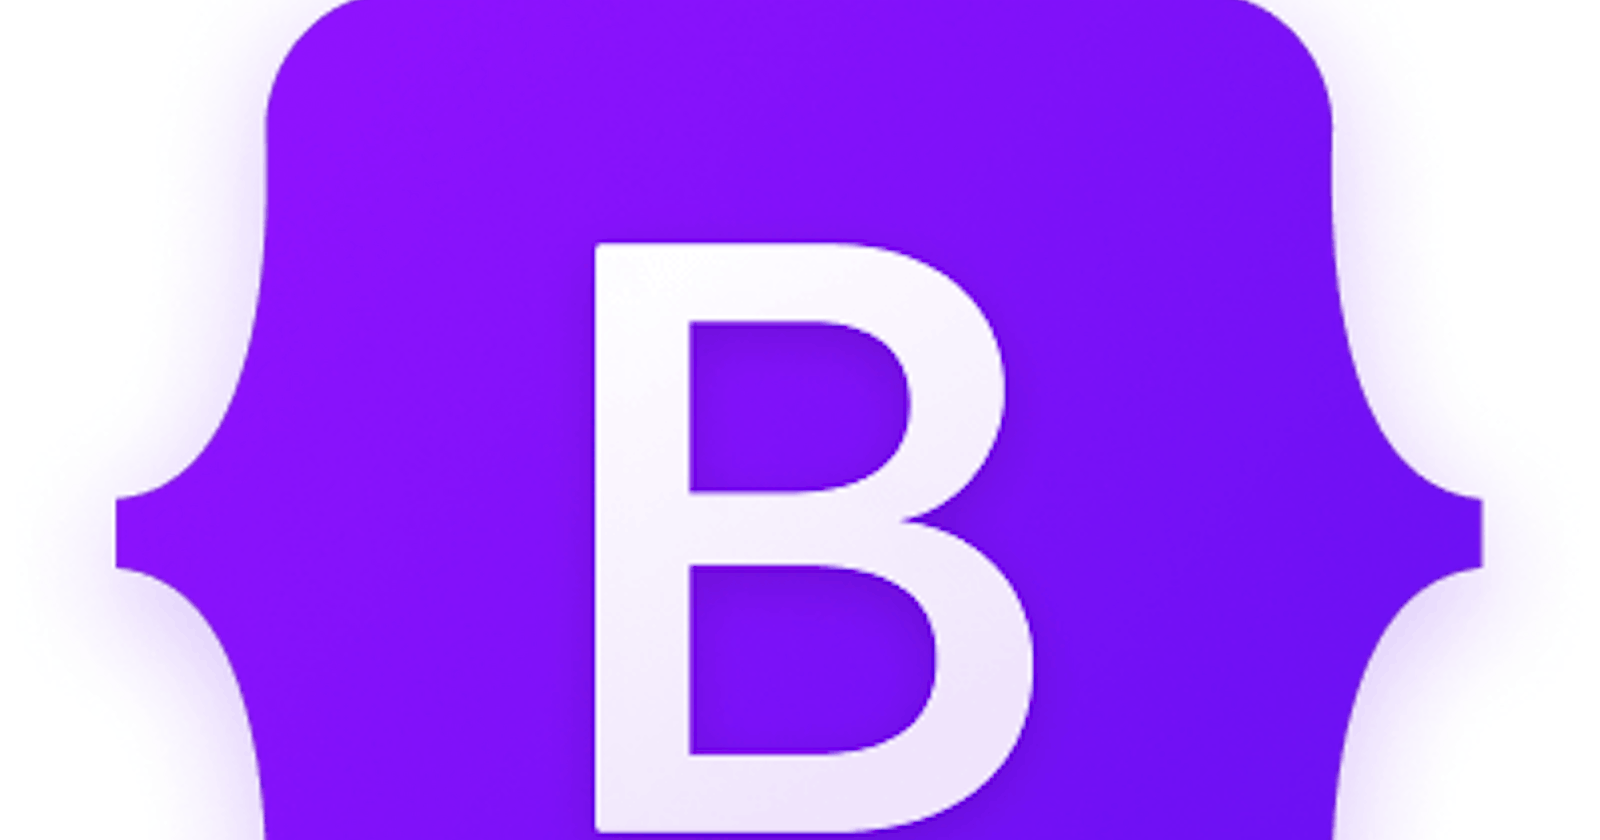 How to install Bootstrap?